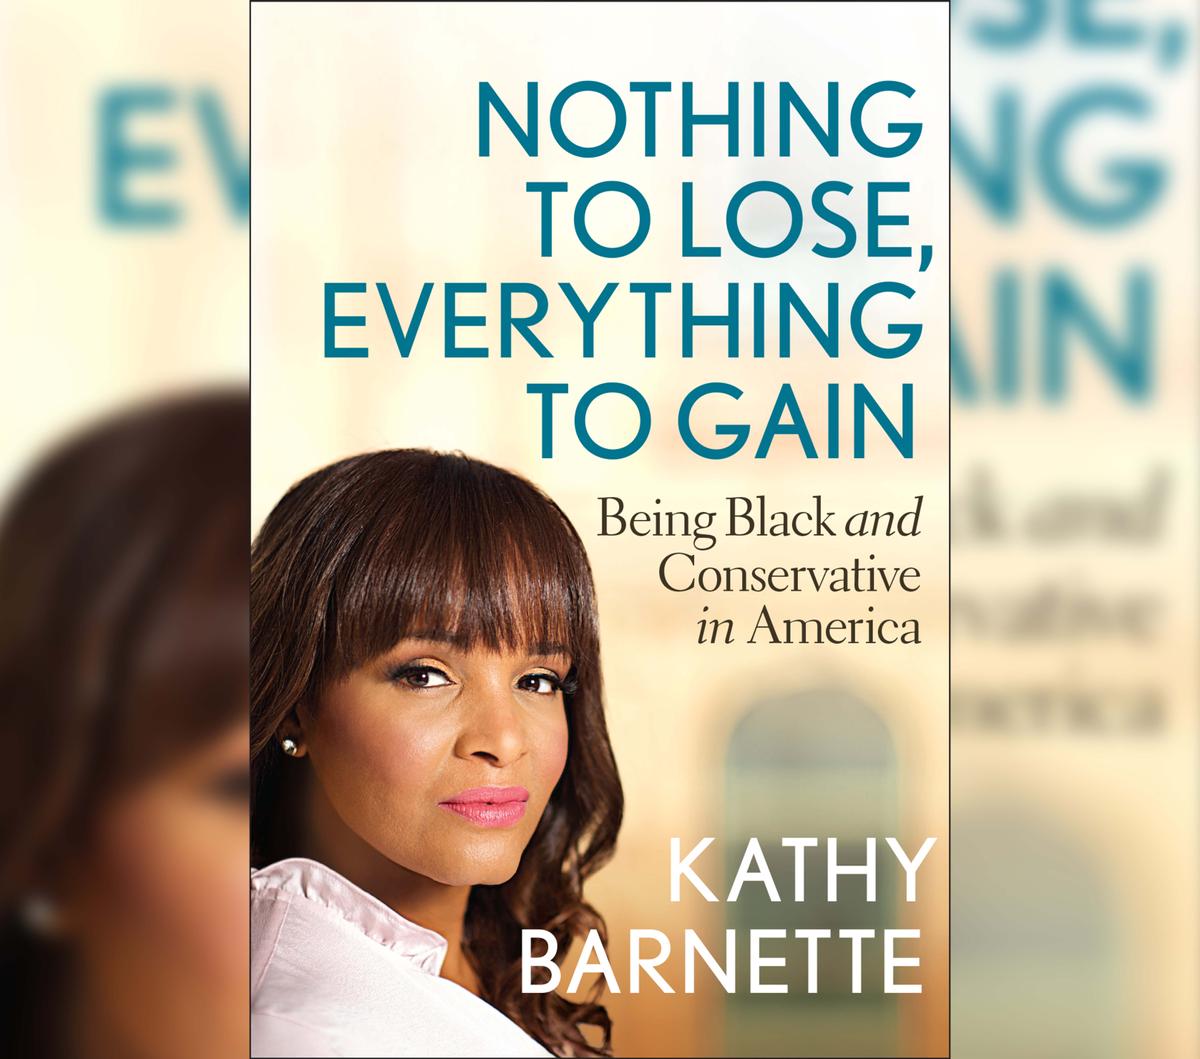 Kathy's book "Nothing to Lose, Everything to Gain." (Courtesy of <a href="https://kathybarnetteforcongress.com/">Kathy Barnette</a>)